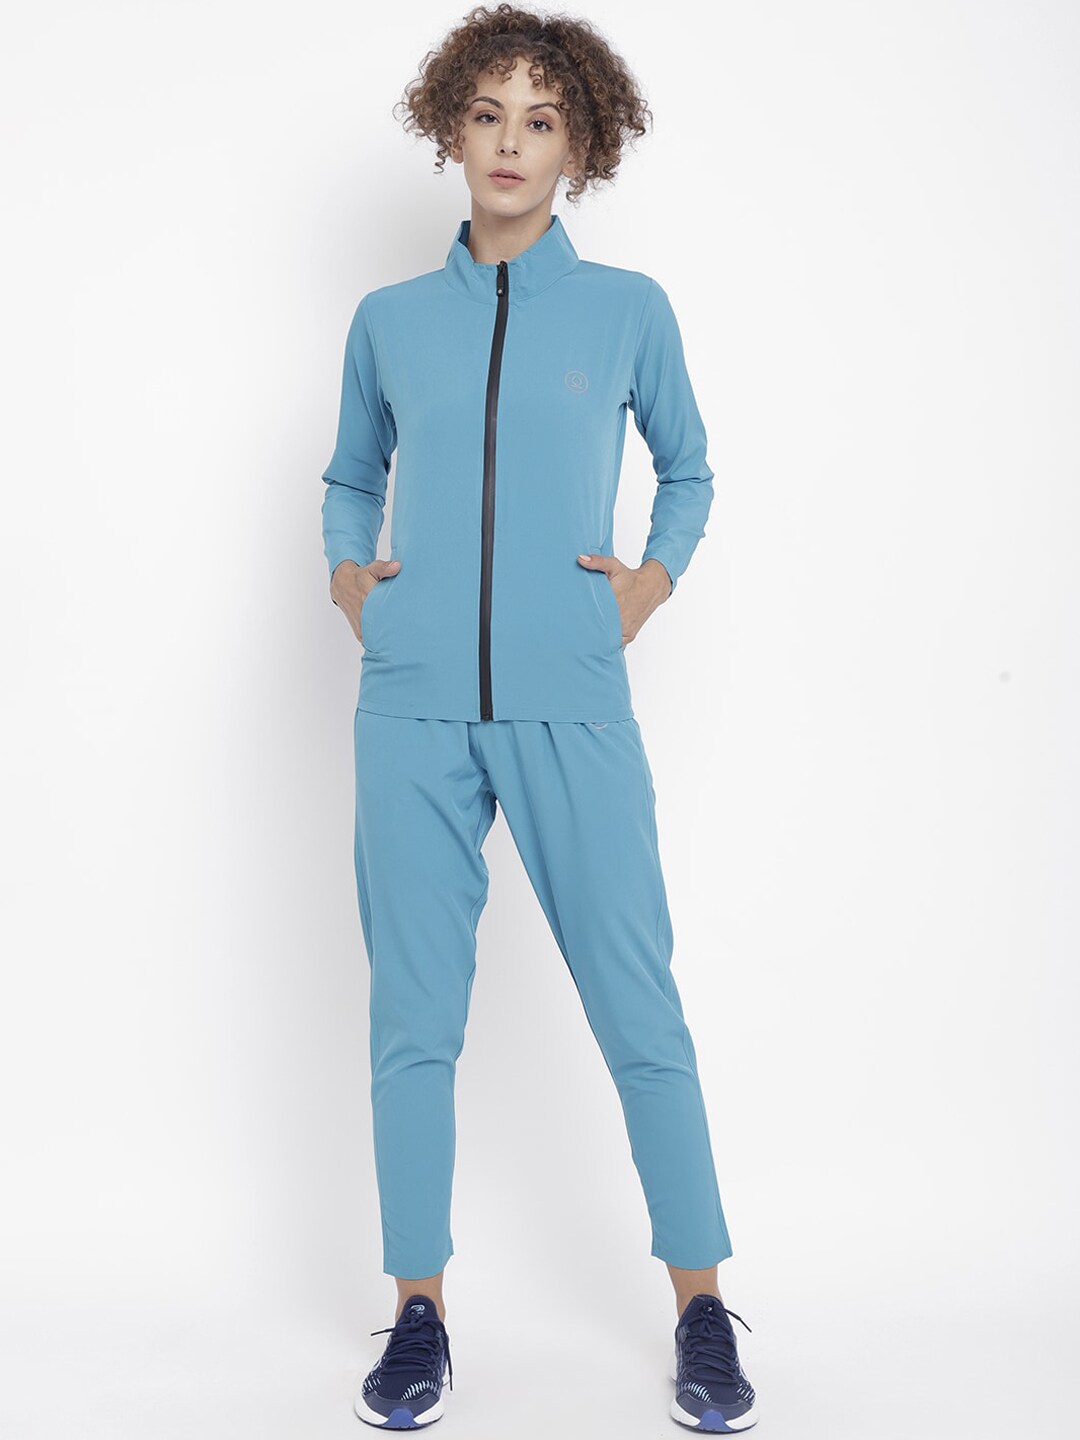 Chkokko Women Blue Solid Track Suit Price in India